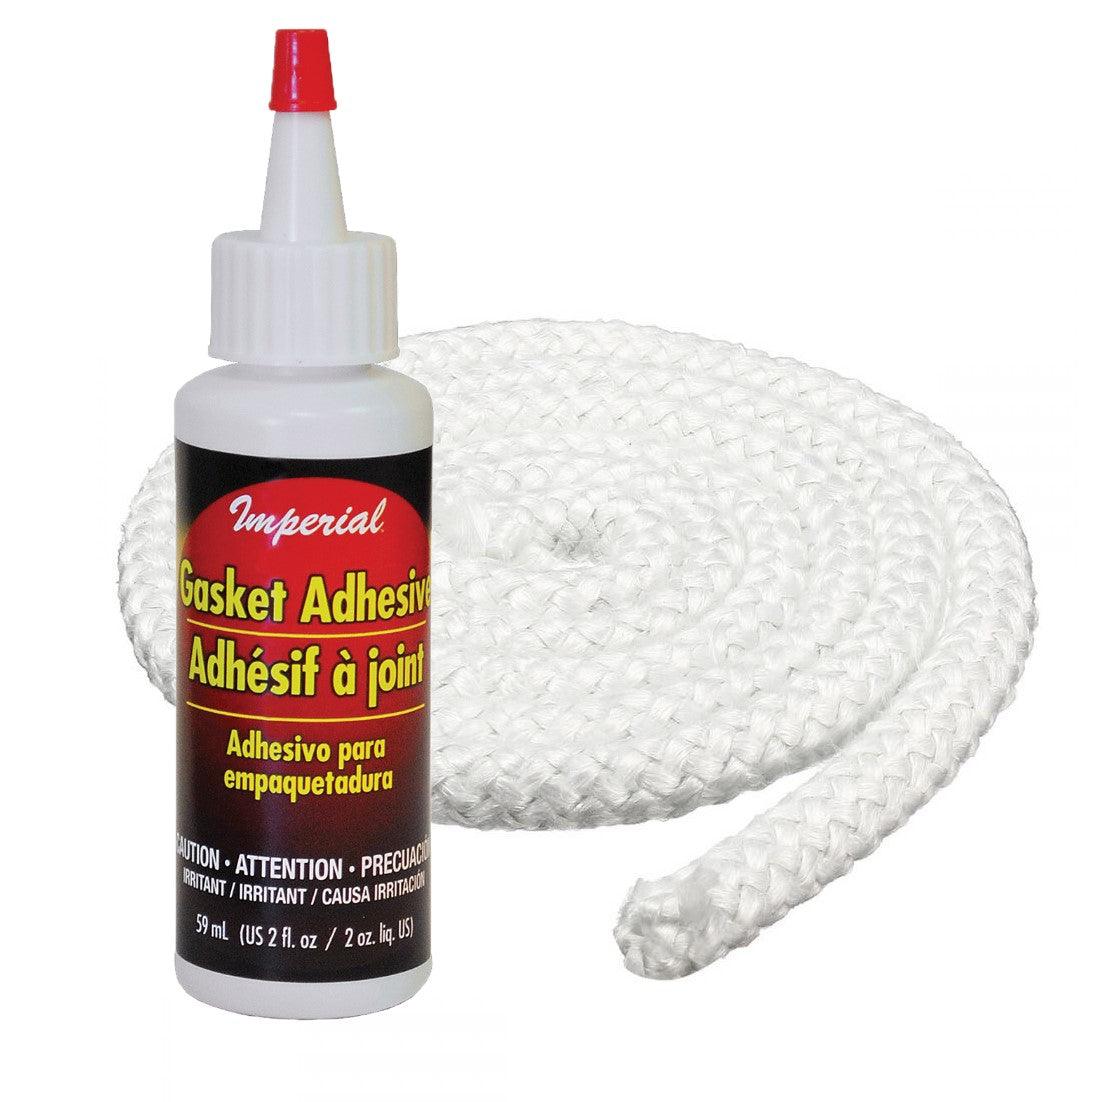 HEAT RESISTANT GLUE FOR ROPE SEAL